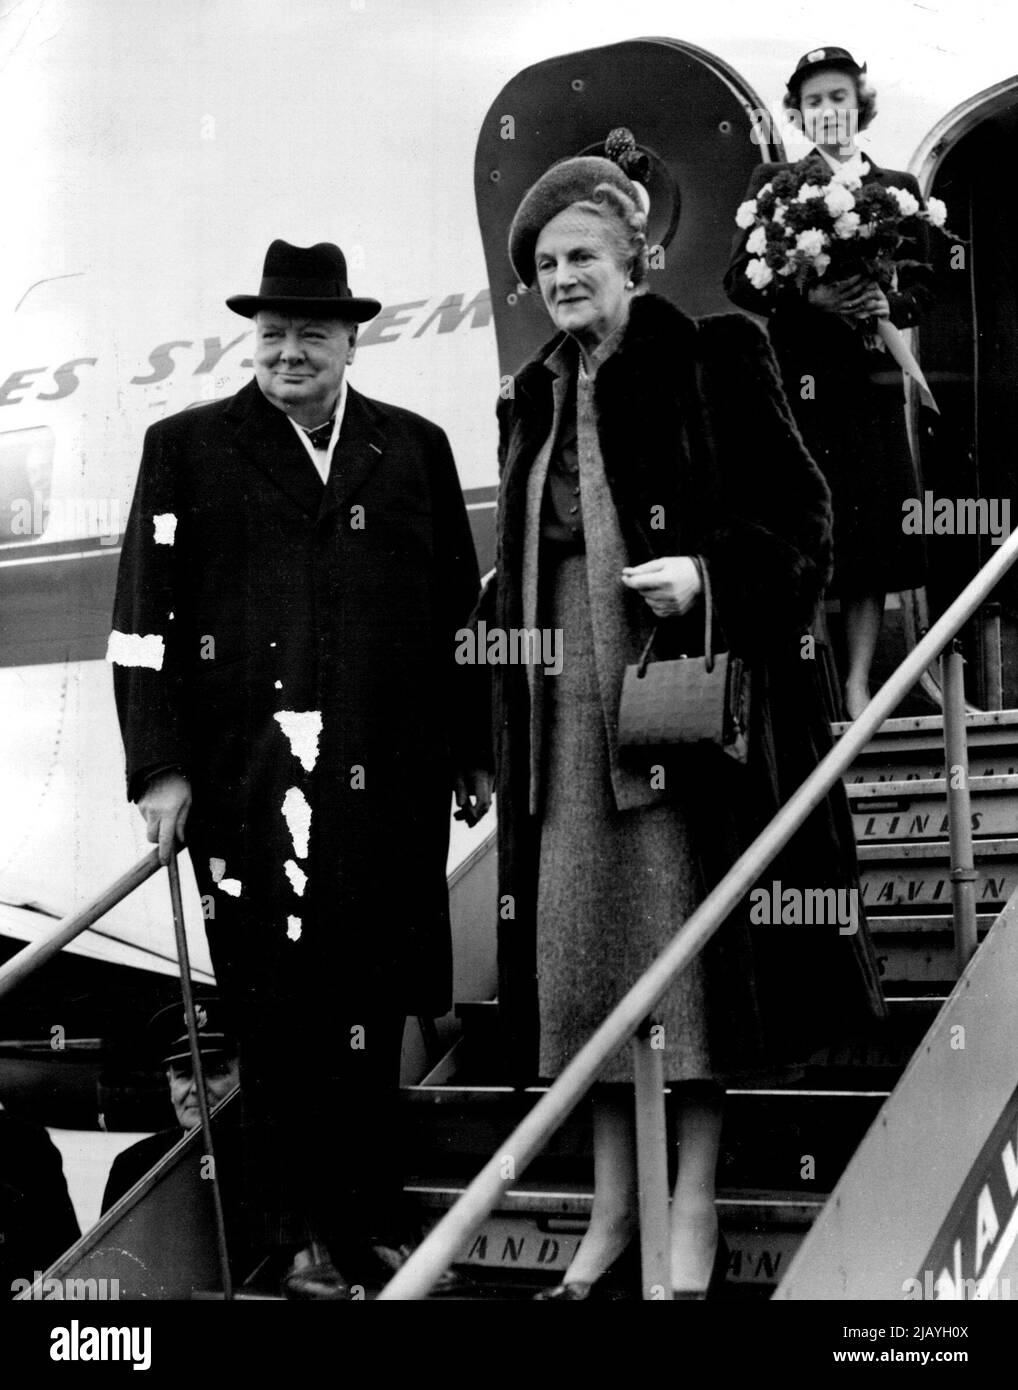 Churchill Goes To Denmark: Mr. and Mrs. Winston Churchill, shown here as they board a Scandinavian Airlines aircraft at Northolt Airport, bound for Copenhagen, today (Monday). Mr. Churchill is to be guest of the Danish King, King Frederick, for four days. He is to receive an honorary doctorate from Copenhagen University. Later he will be guest of honour at a Government banquet. October 09, 1950. (Photo by Reuterphoto). Stock Photo